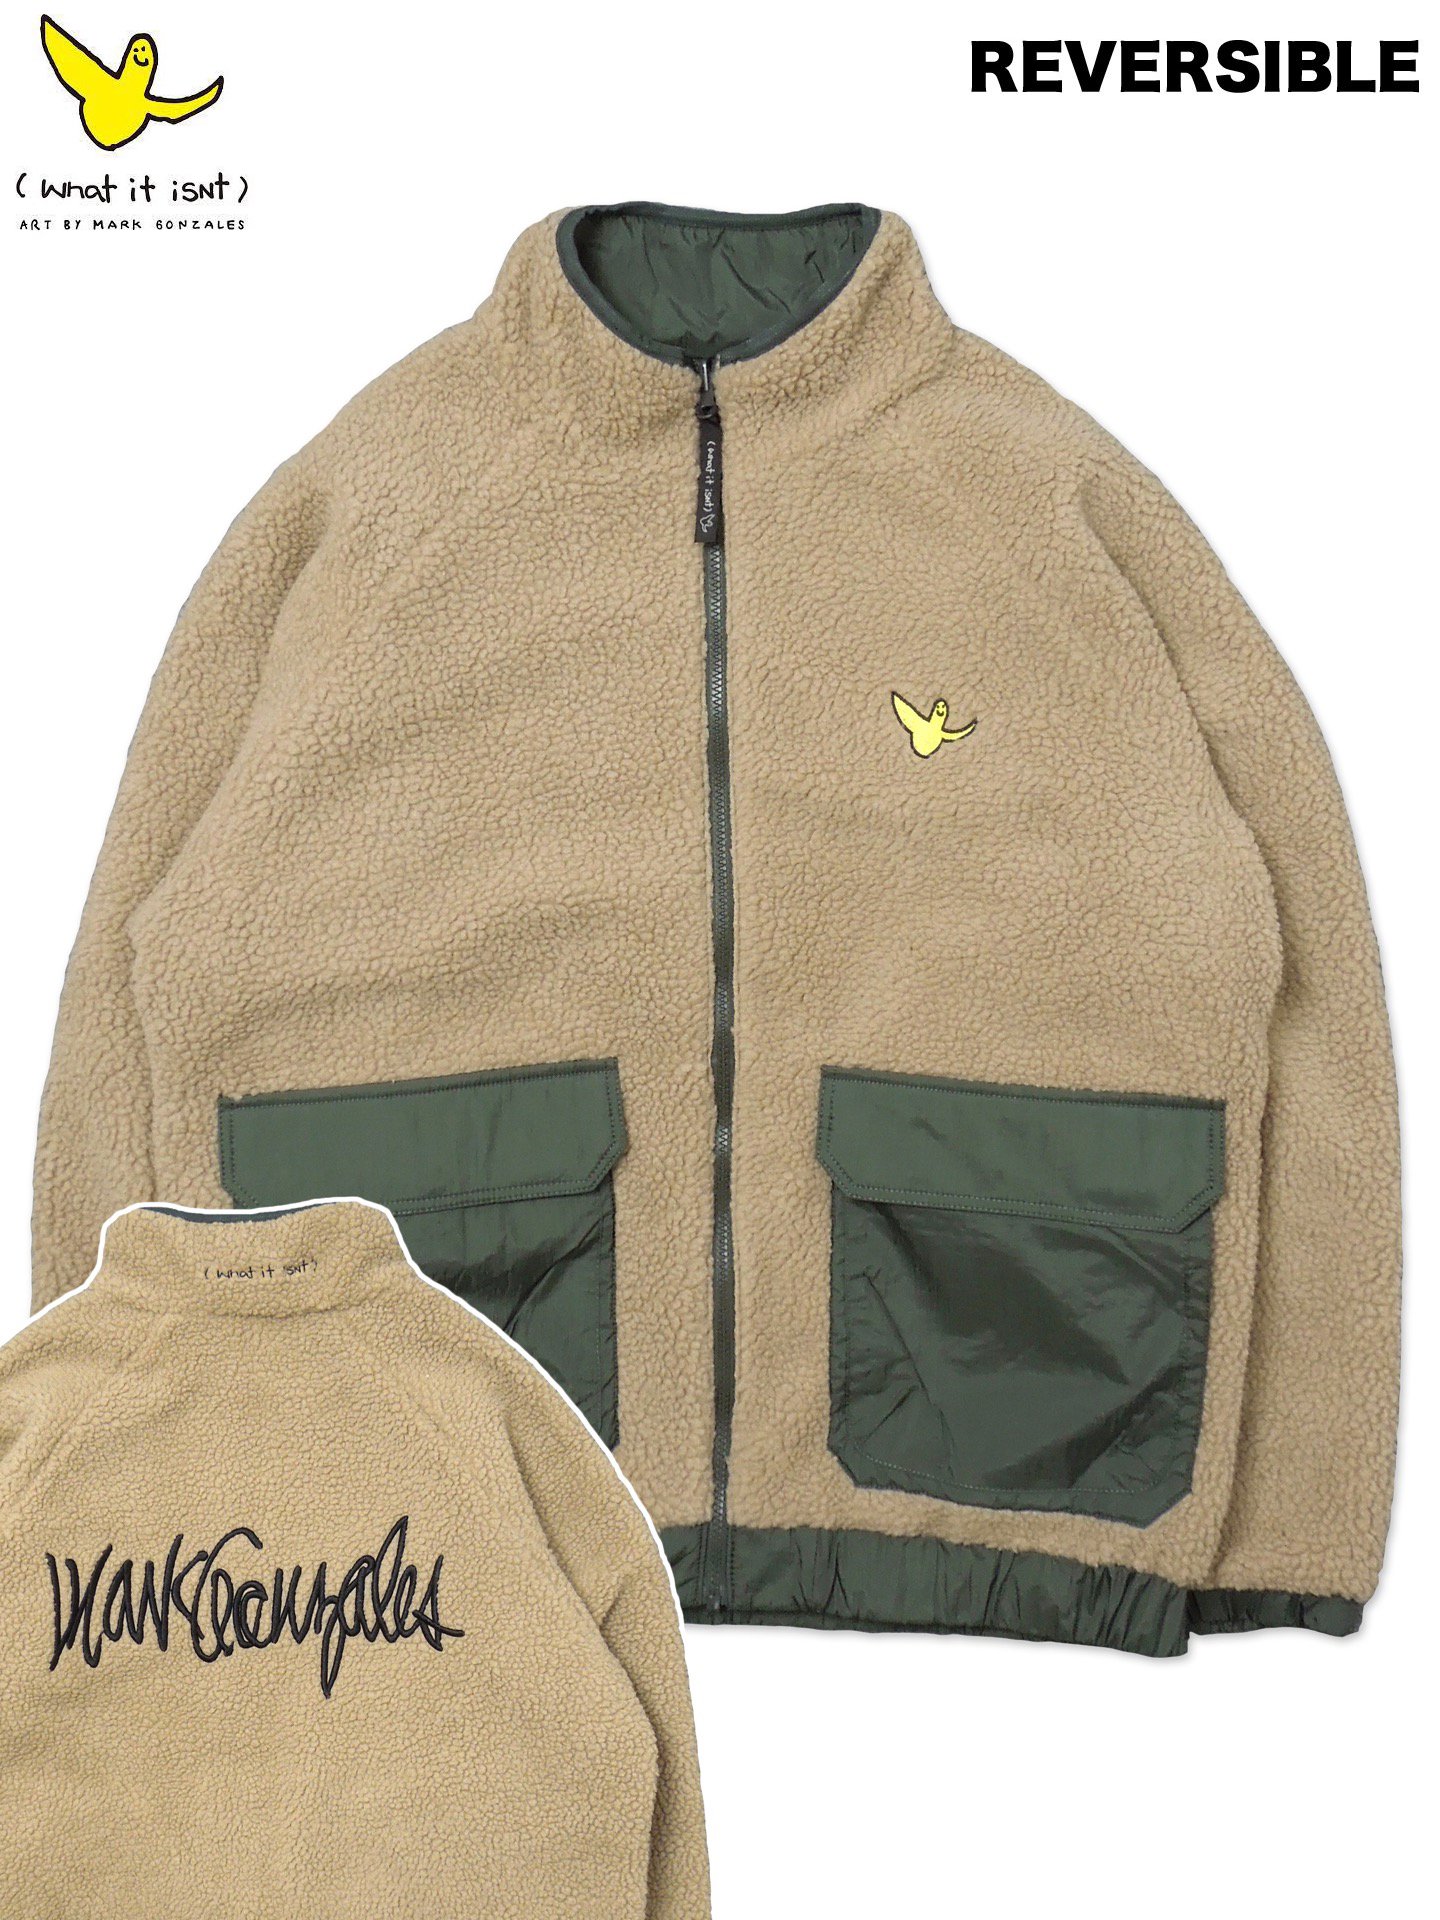 [What it isNt ART BY MARK GONZALES] リバーシブルスタンドカラージャケット(BE) - FLASH POINT  Web Shop